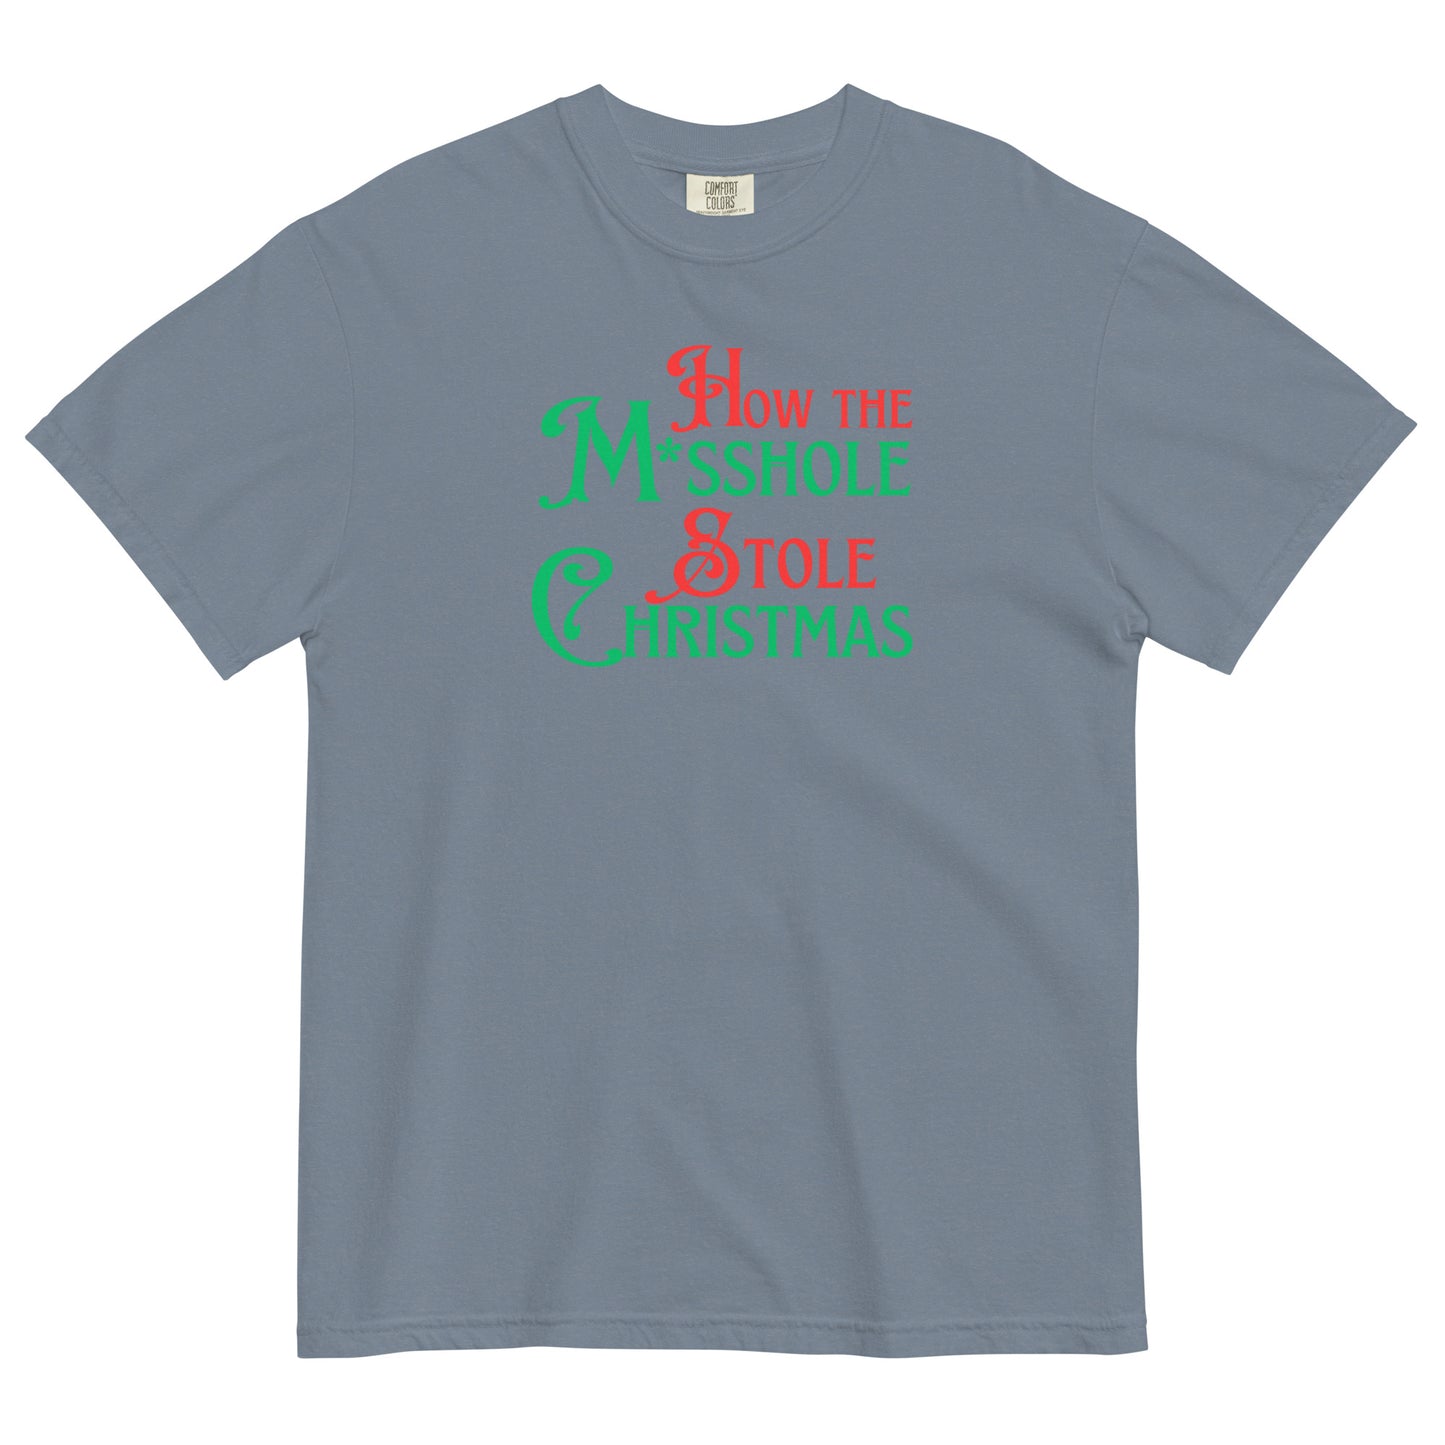 How the M*sshole Stole Christmas T-Shirt